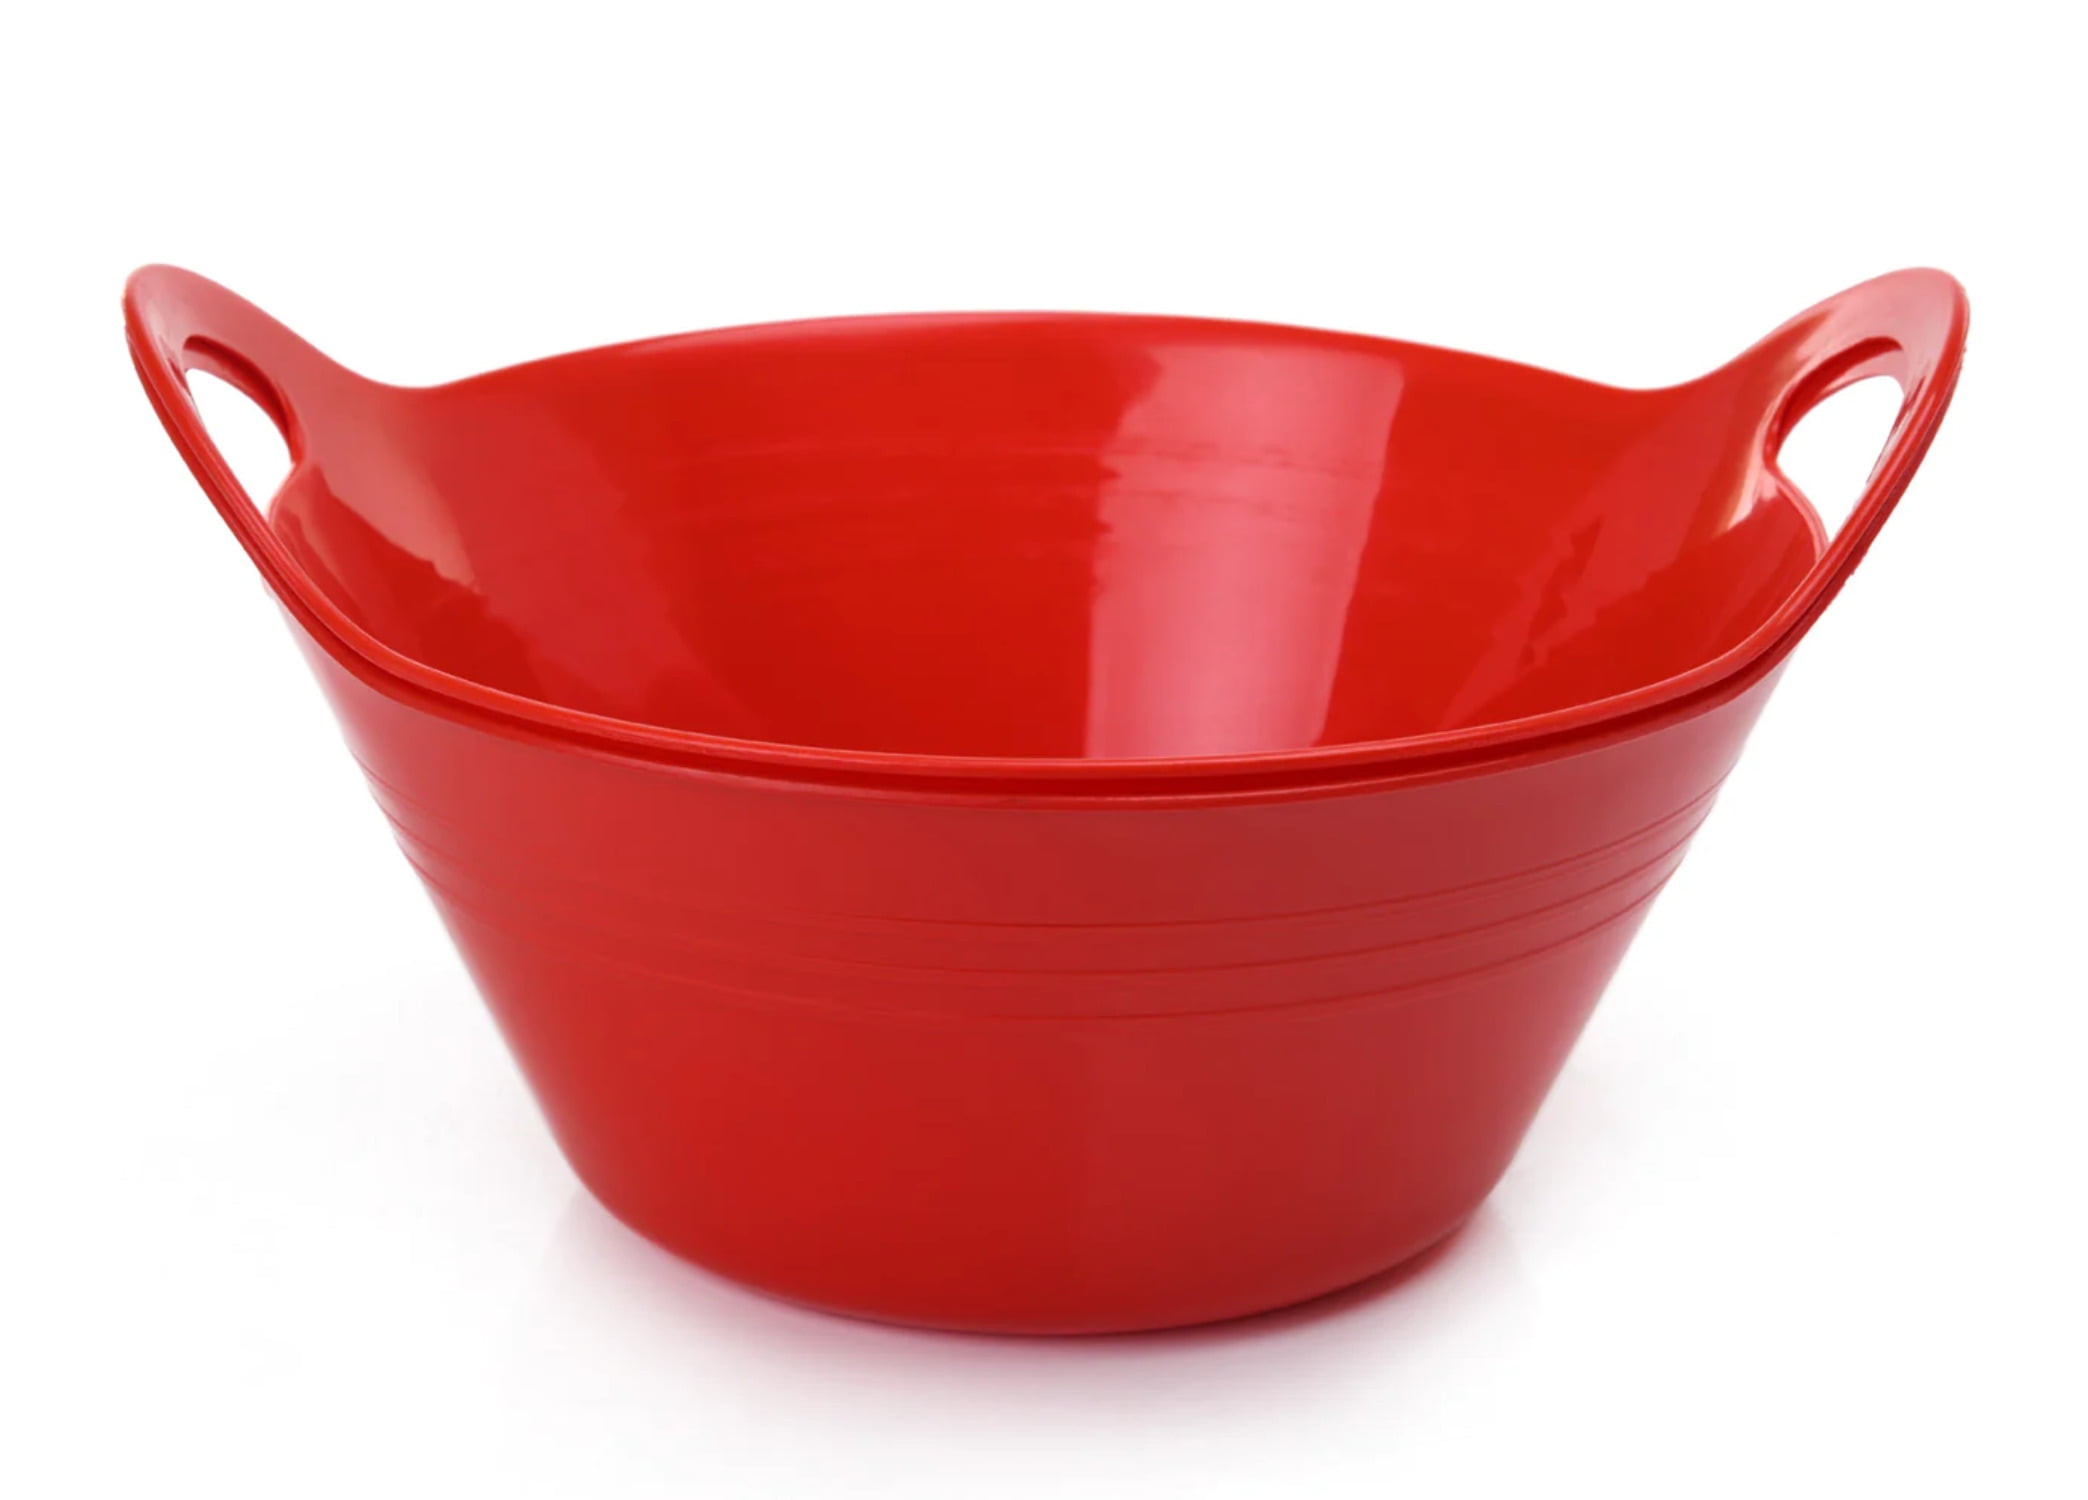 Solo Plastic Bowl 20 oz/22 ct Mixed Red & Blue (Pack of 12)